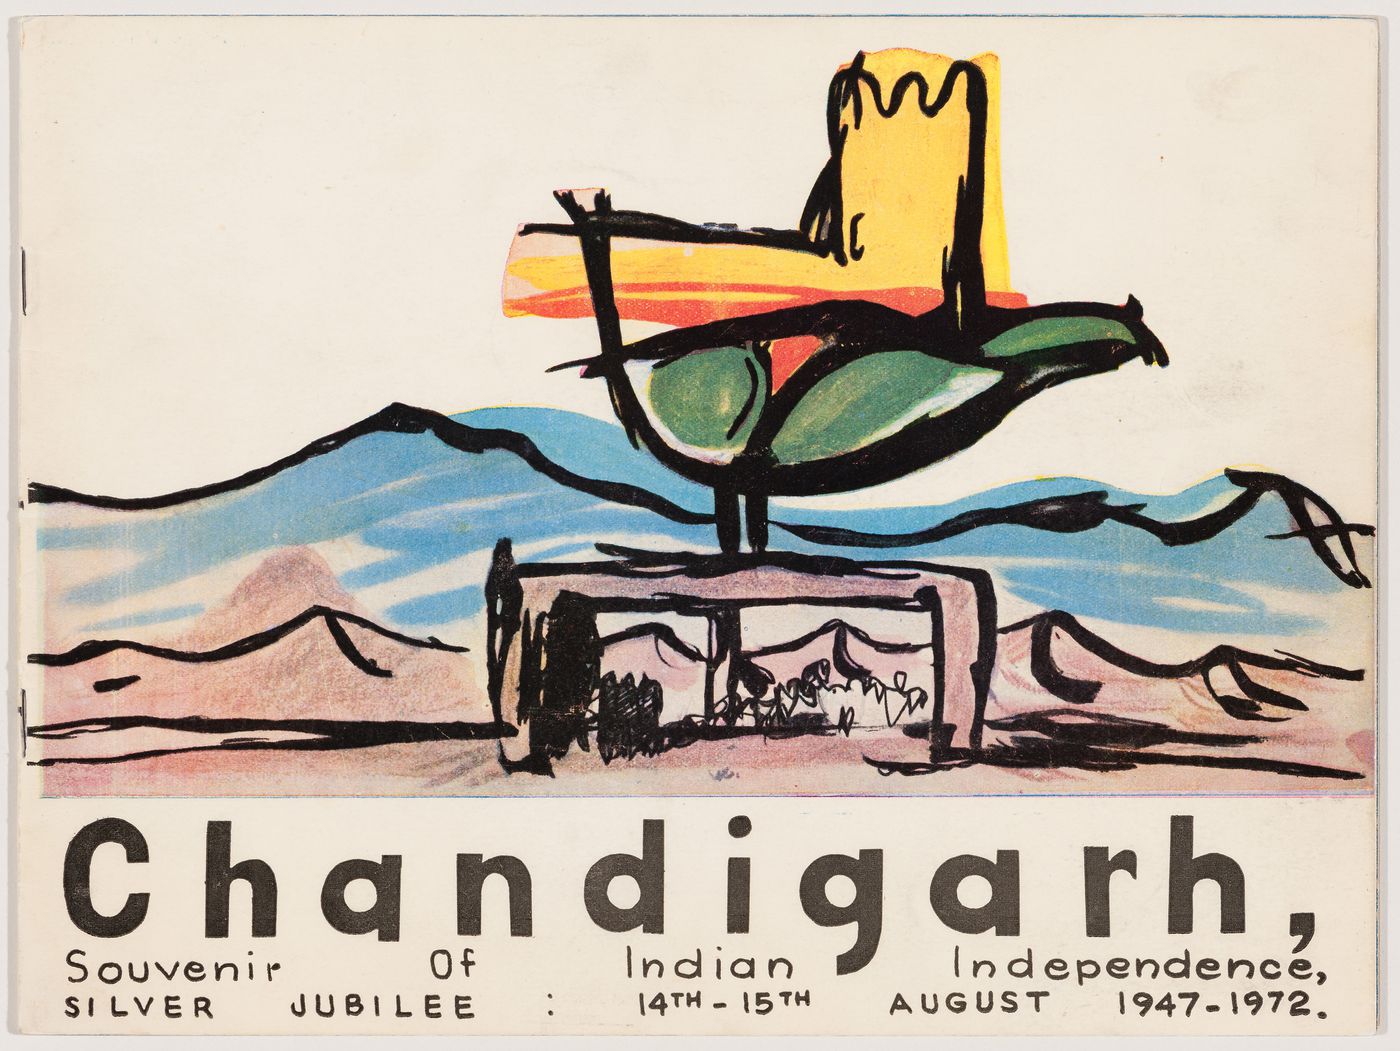 Chandigarh: souvenir of Indian independence: silver jubilee: 14th-15th August, 1947-1972